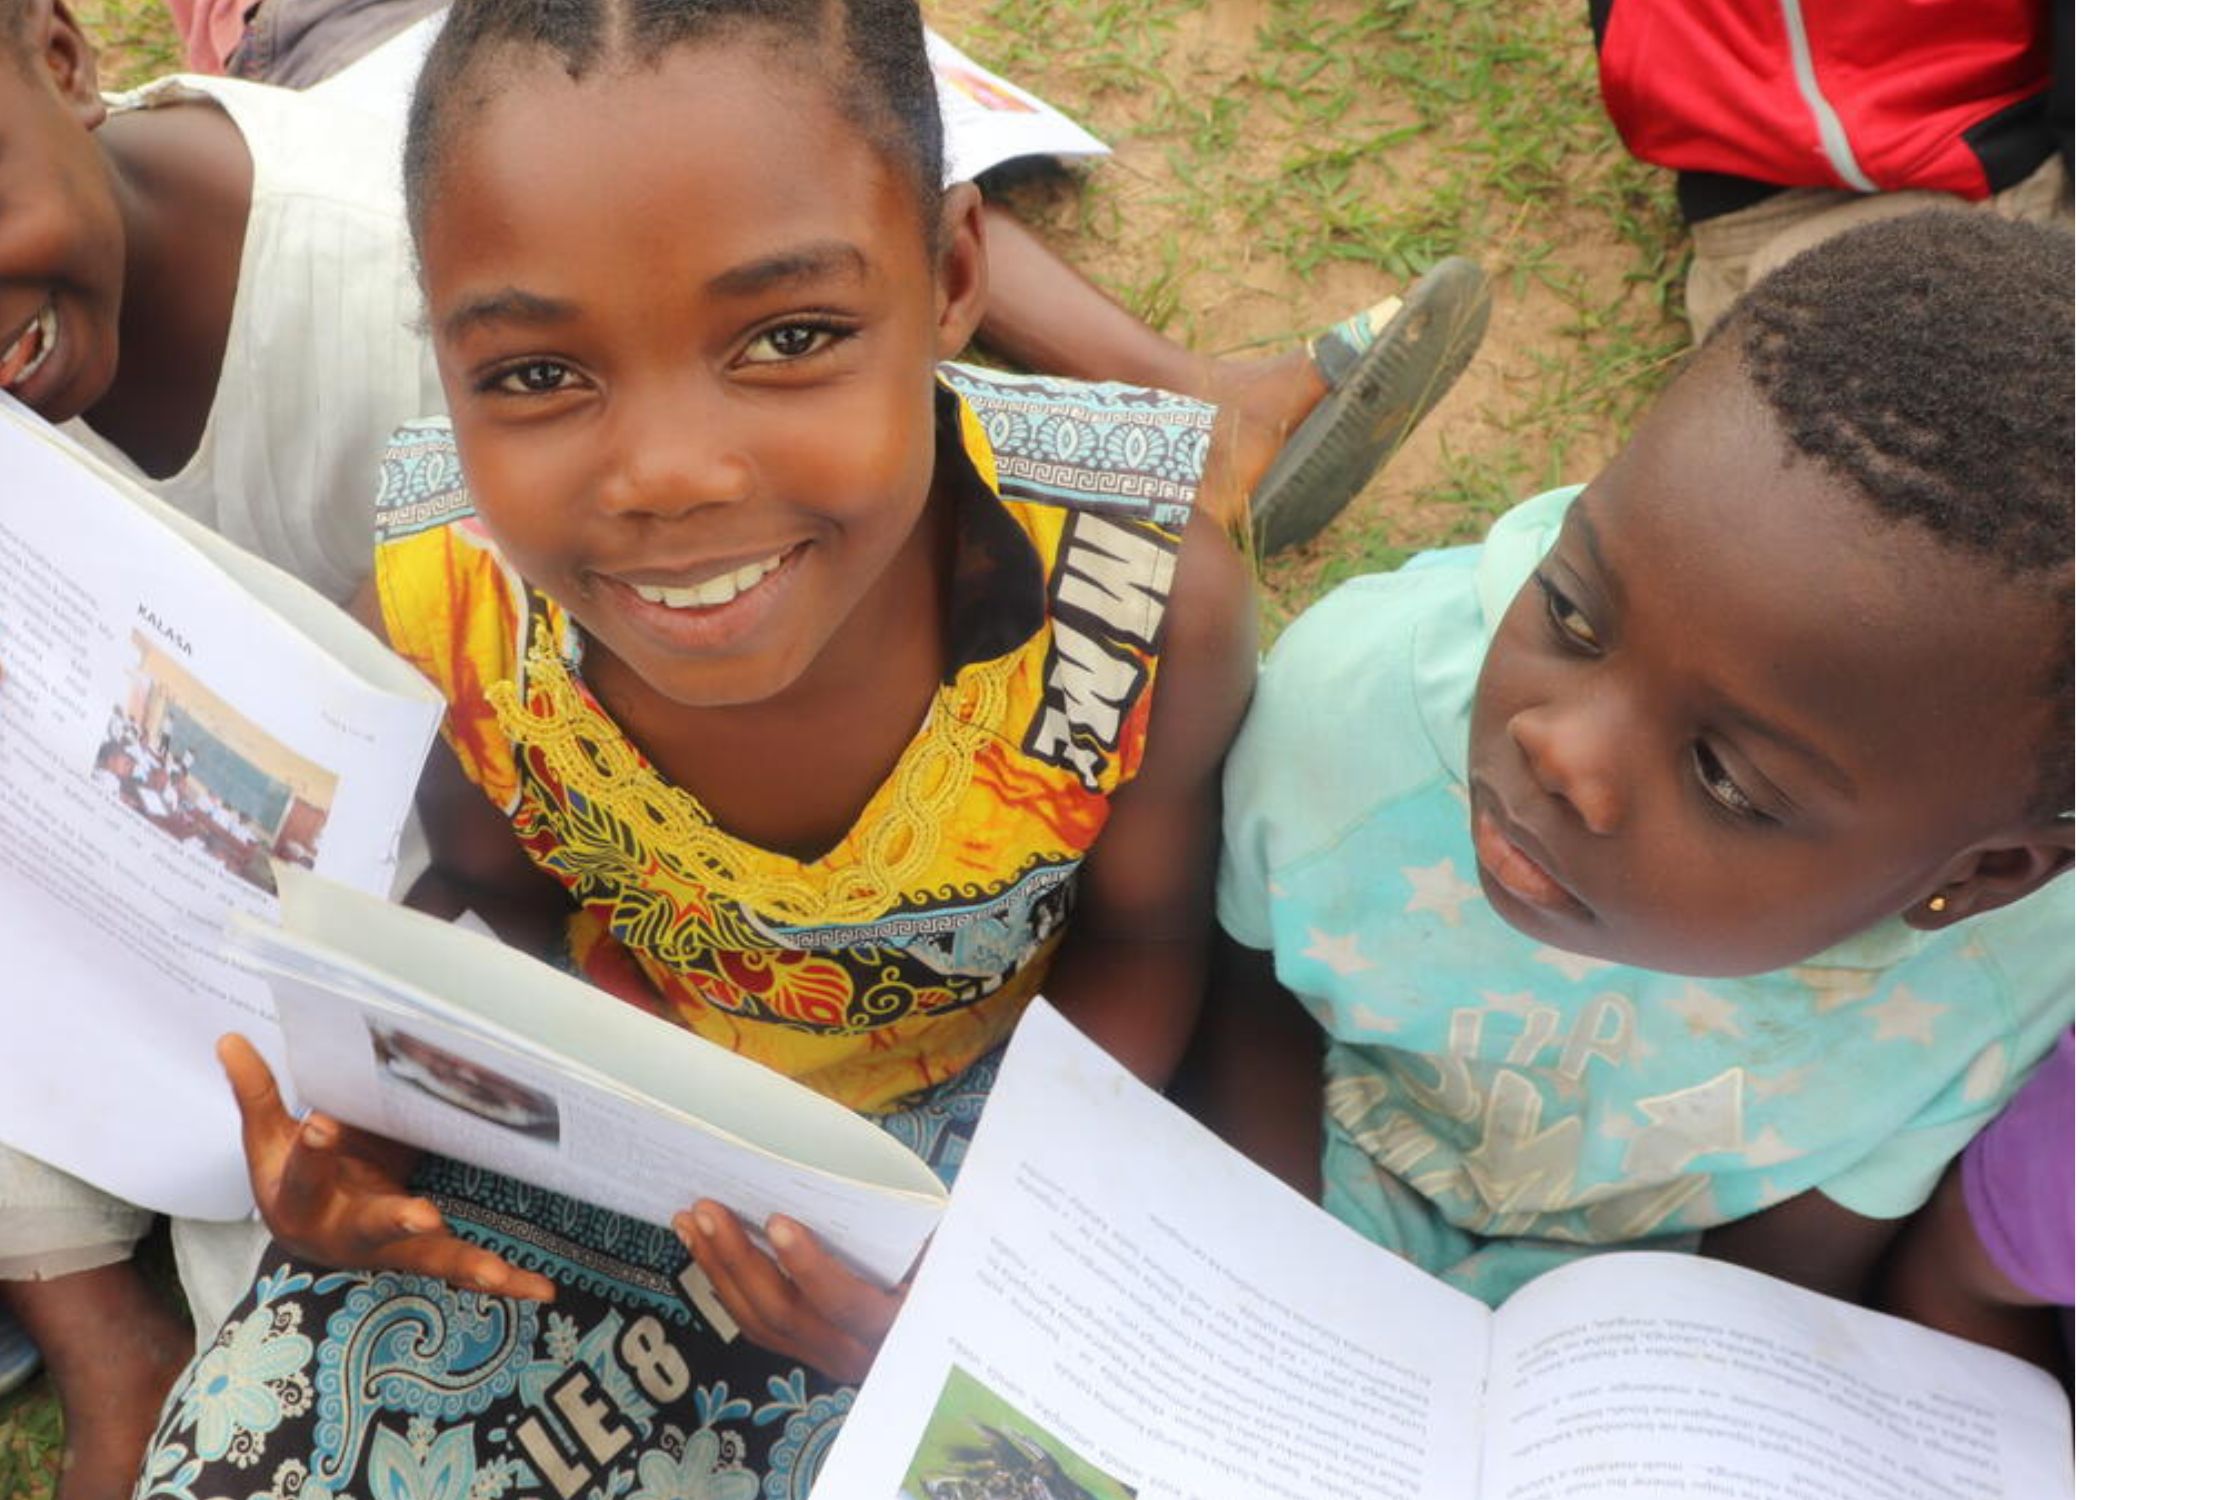 Girl from DRC smiling and holding a reading book amongst other school children